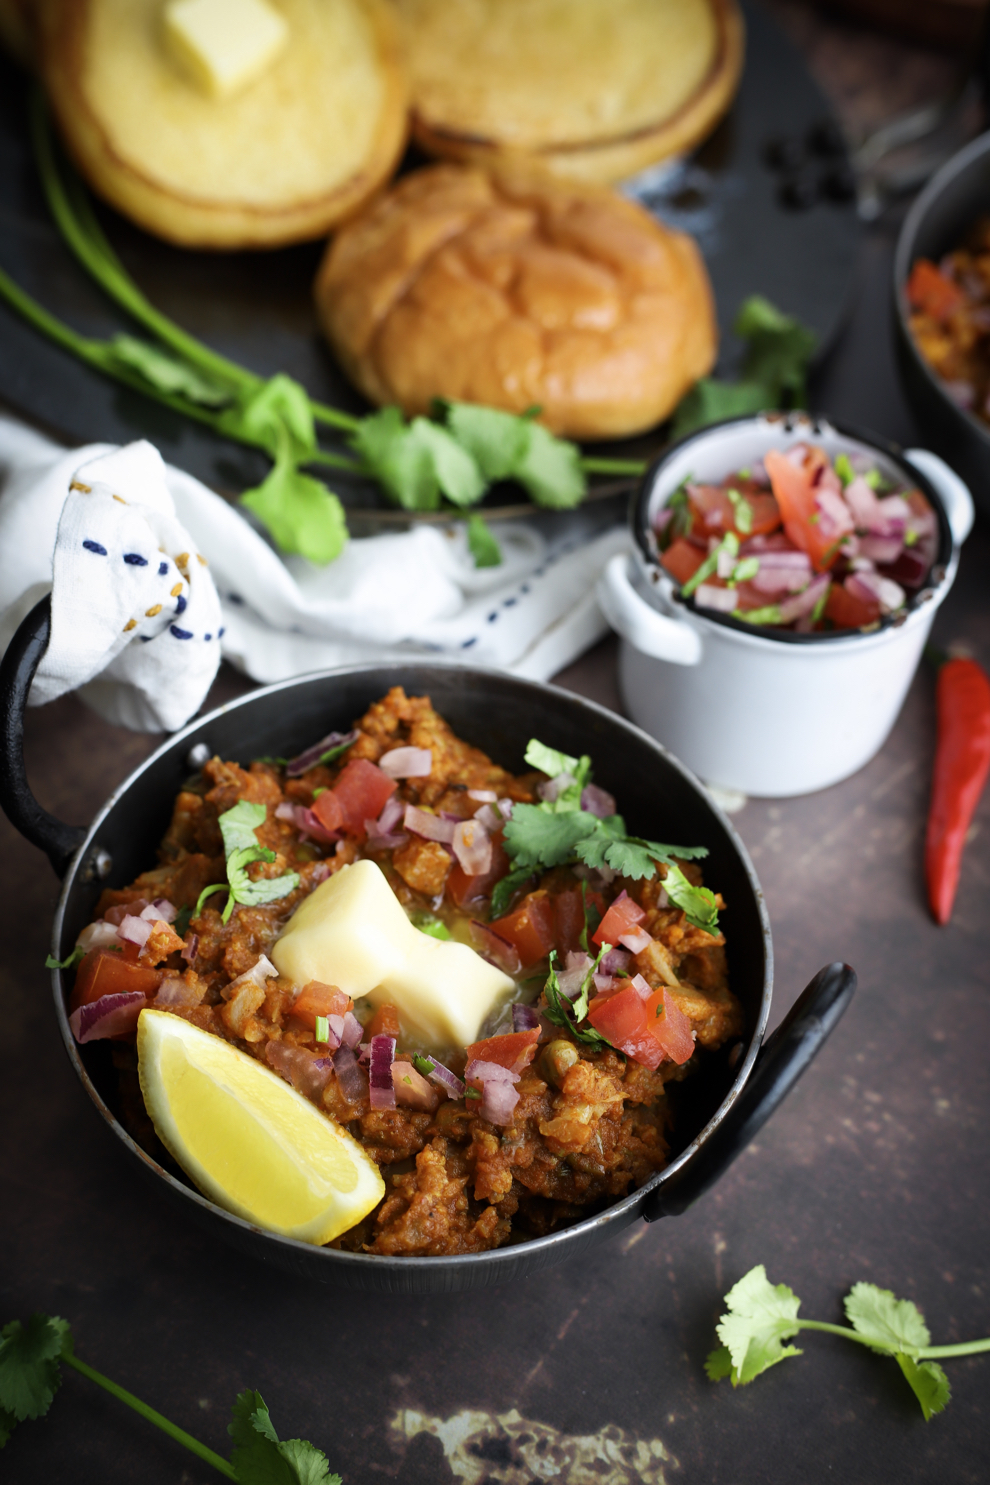 Melt-in-the-Mouth Butter Pau Bhaji